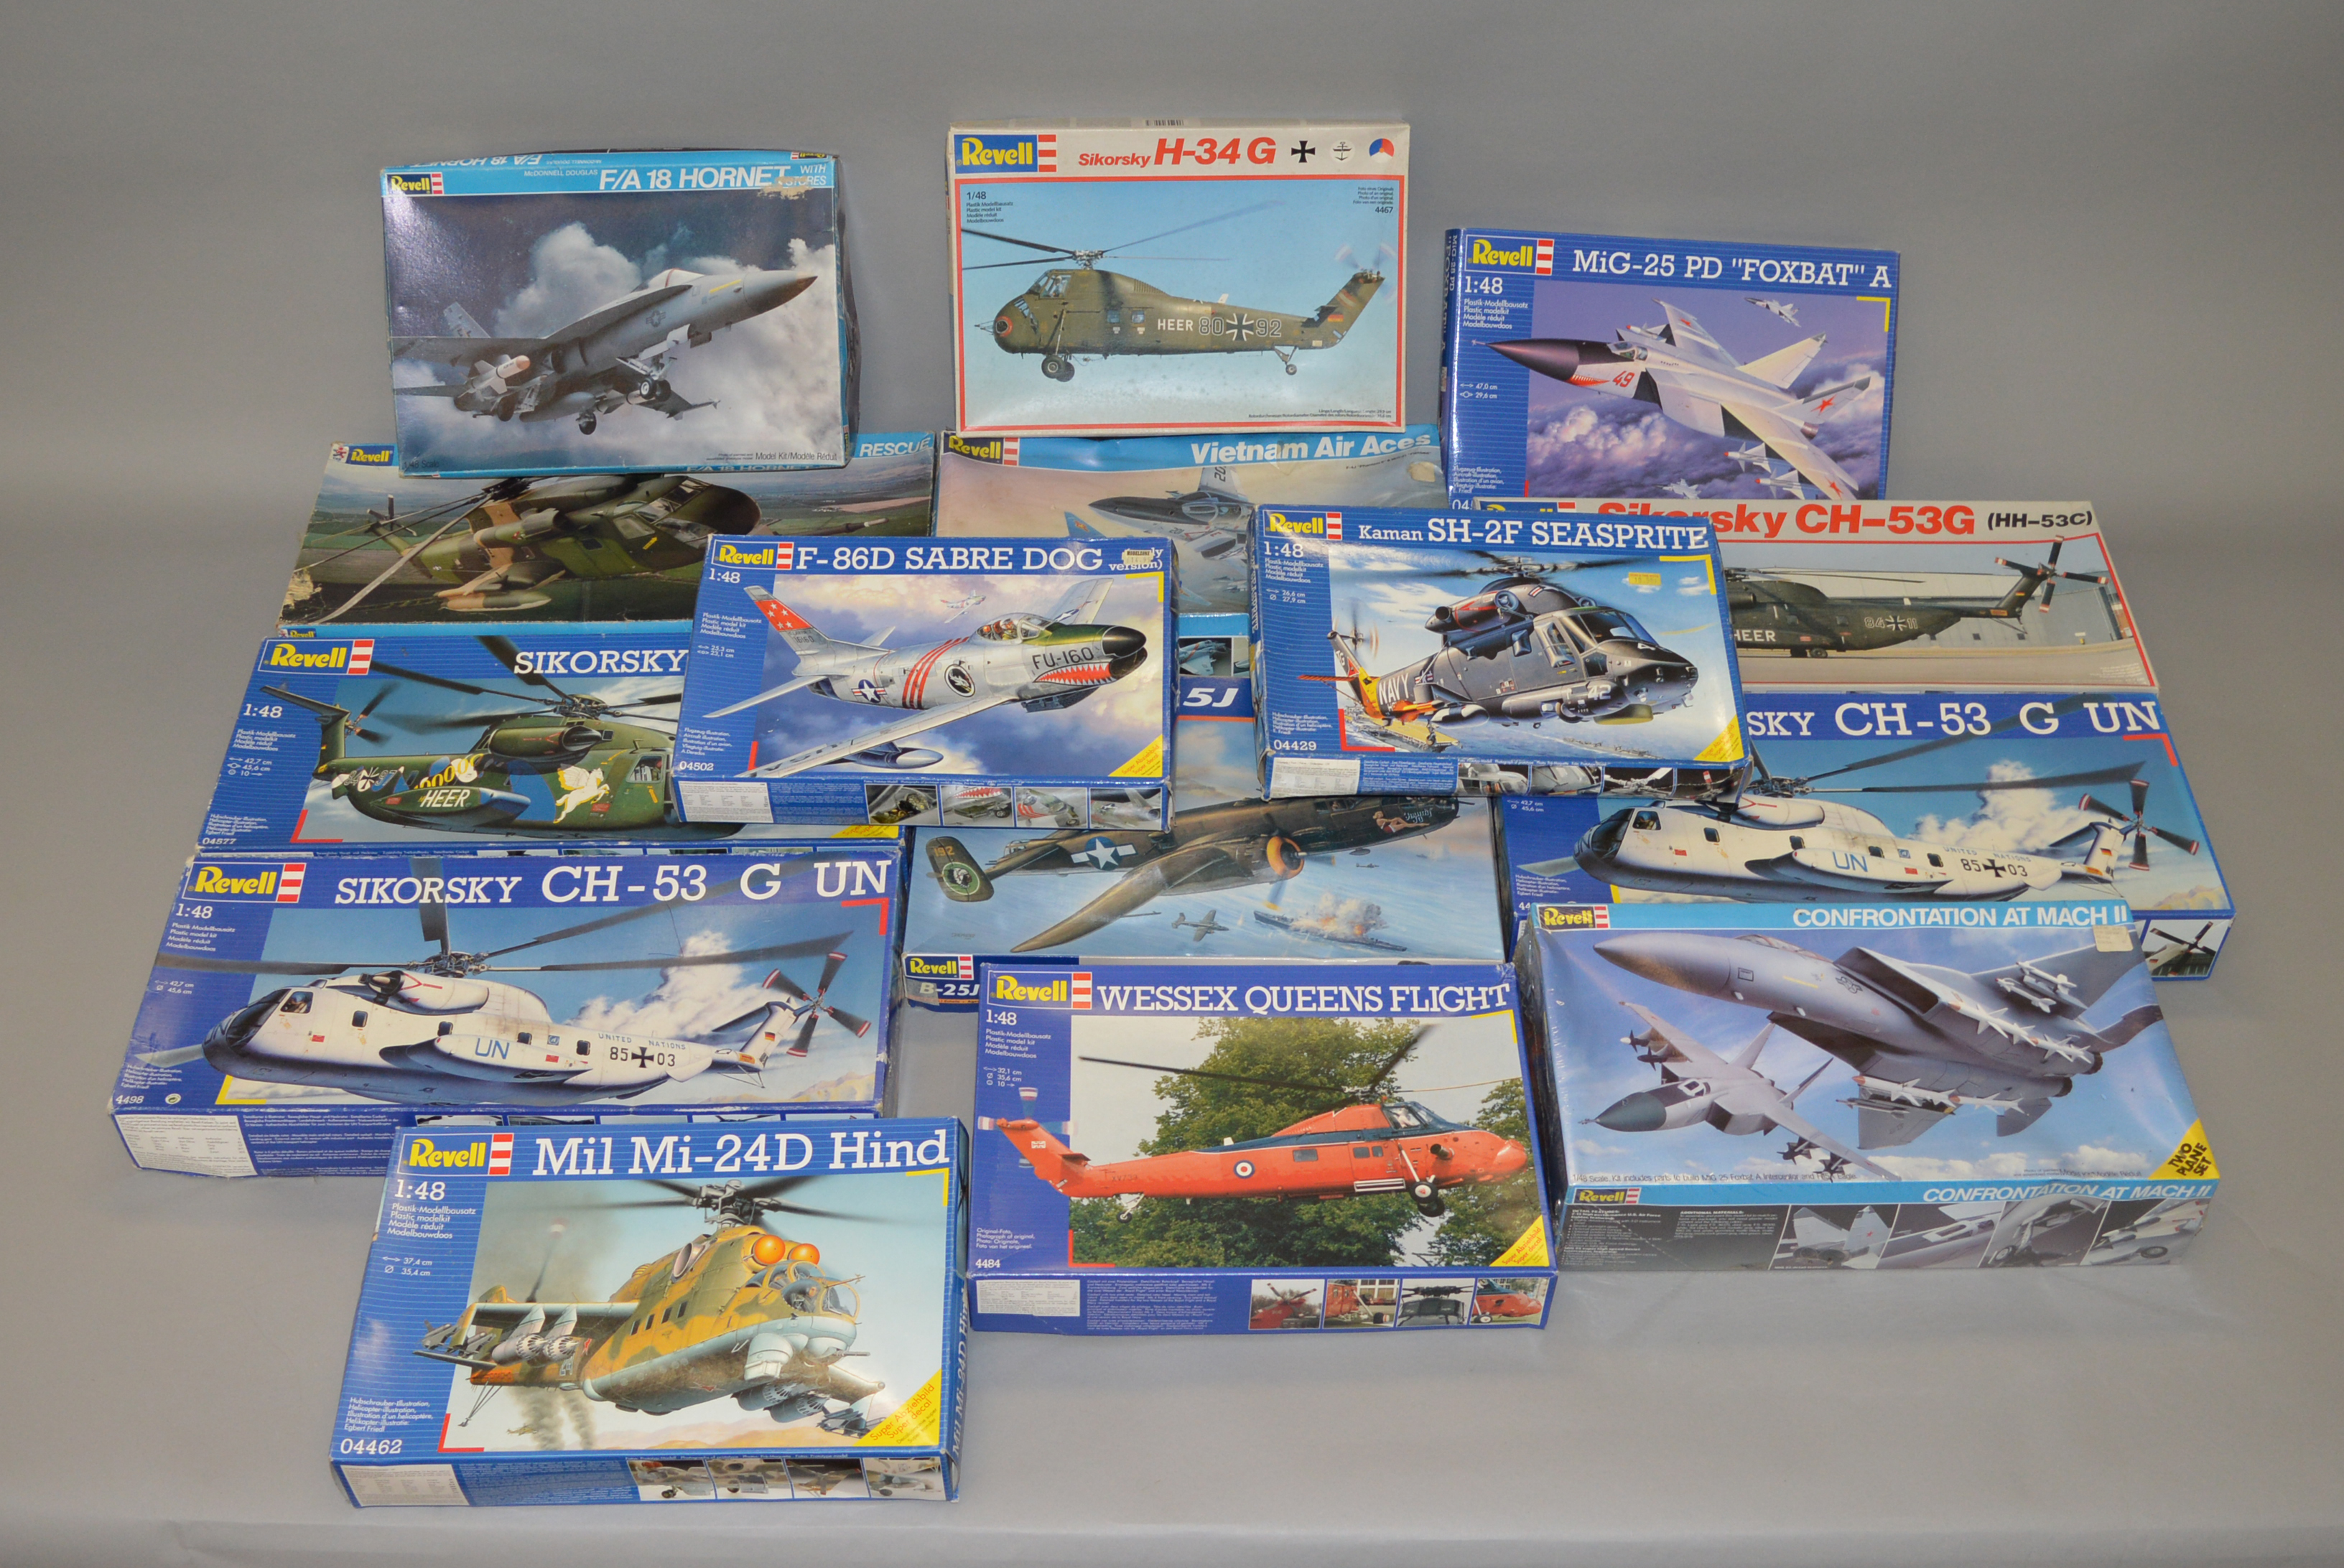 15 x Revell 1:48 scale model aircraft kits. Viewing recommended.